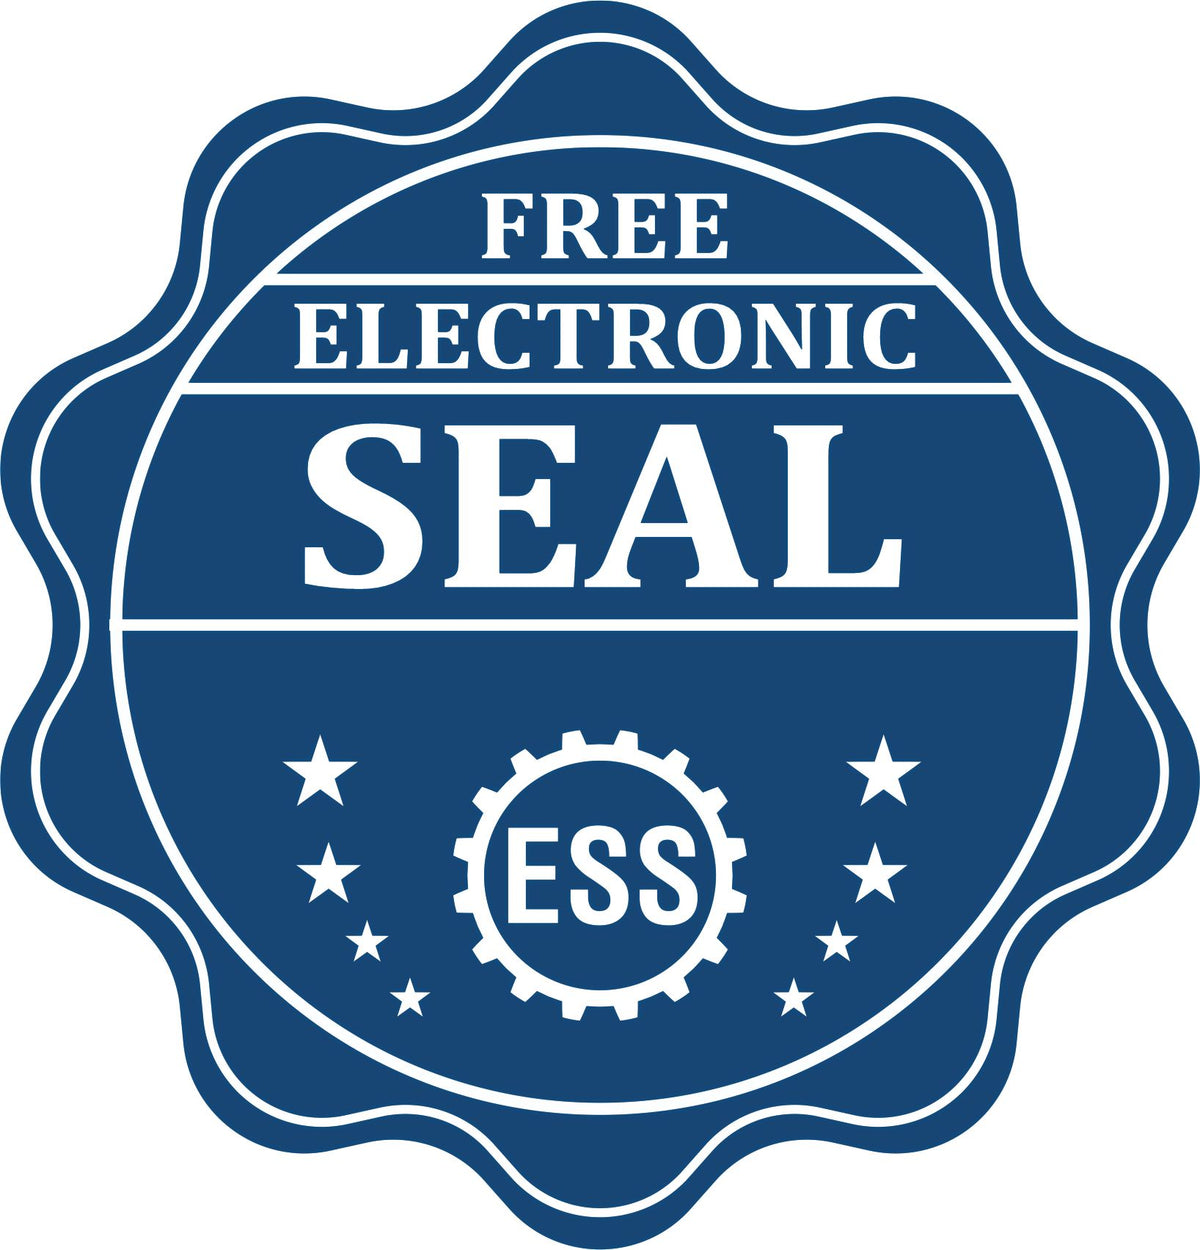 A badge showing a free electronic seal for the Handheld Maryland Land Surveyor Seal with stars and the ESS gear on the emblem.